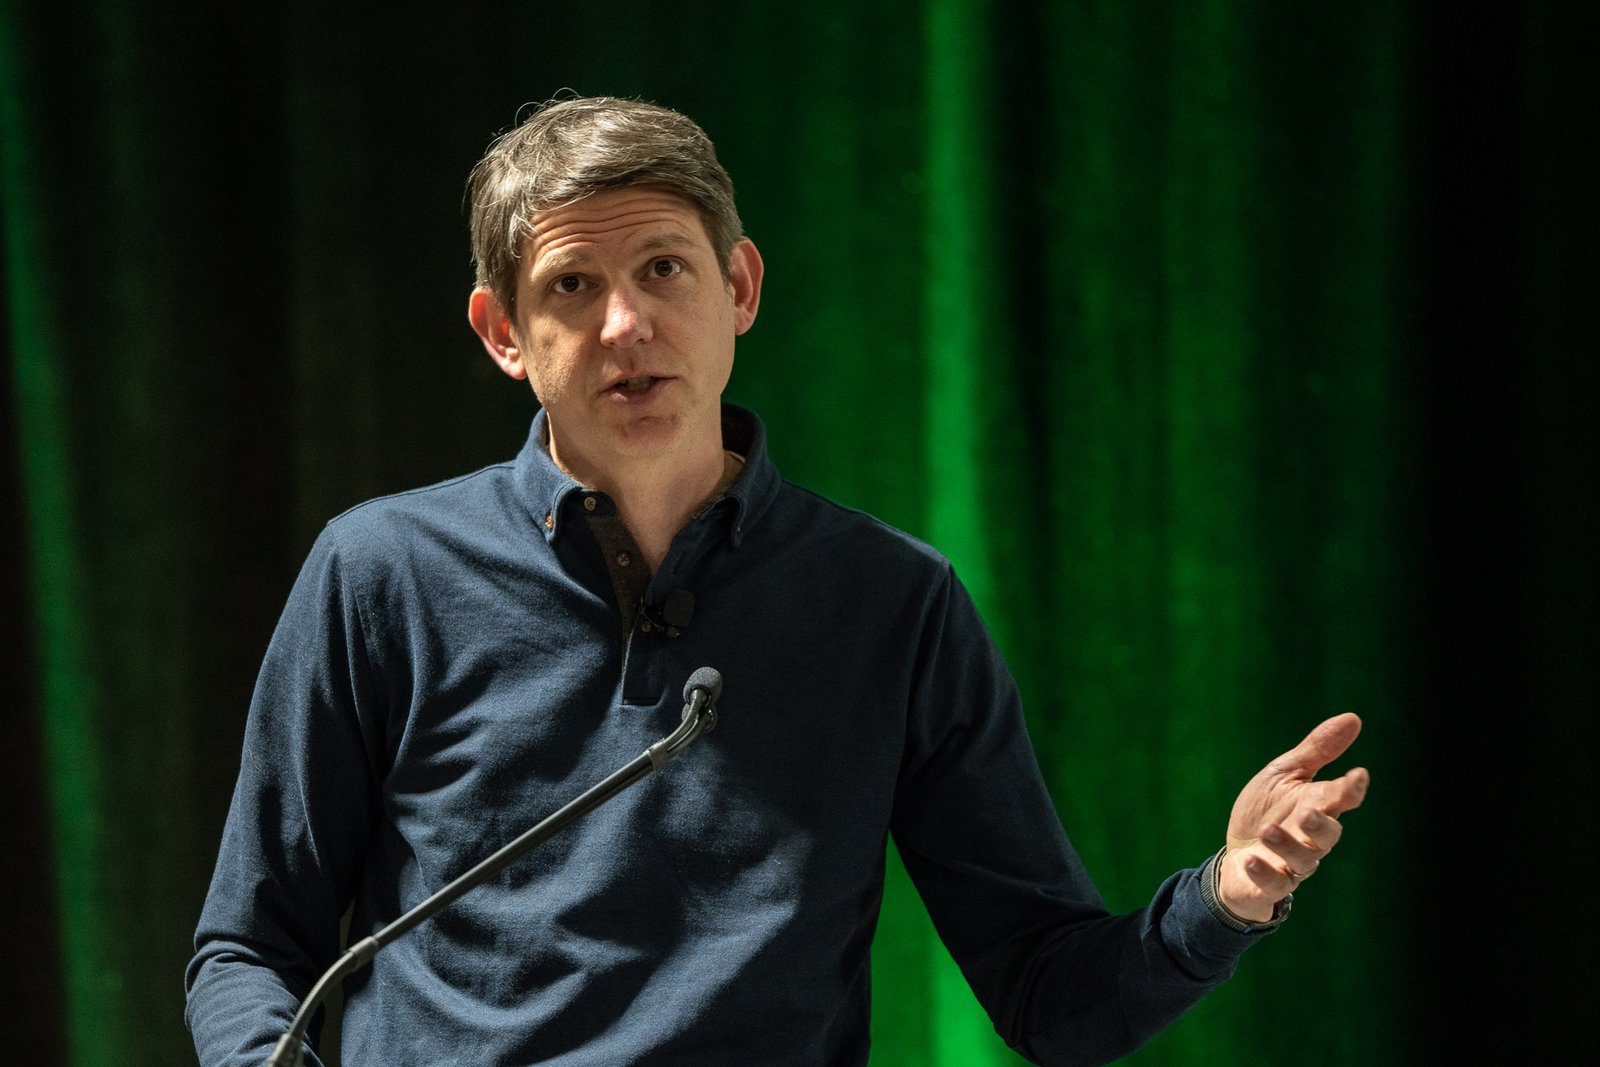 David Thacker, GP at Greylock talk about "How to Find Product-Market Fit" at TechCrunch Early Stage in Boston on April 20, 2023. Image Credit: Haje Kamps / TechCrunch